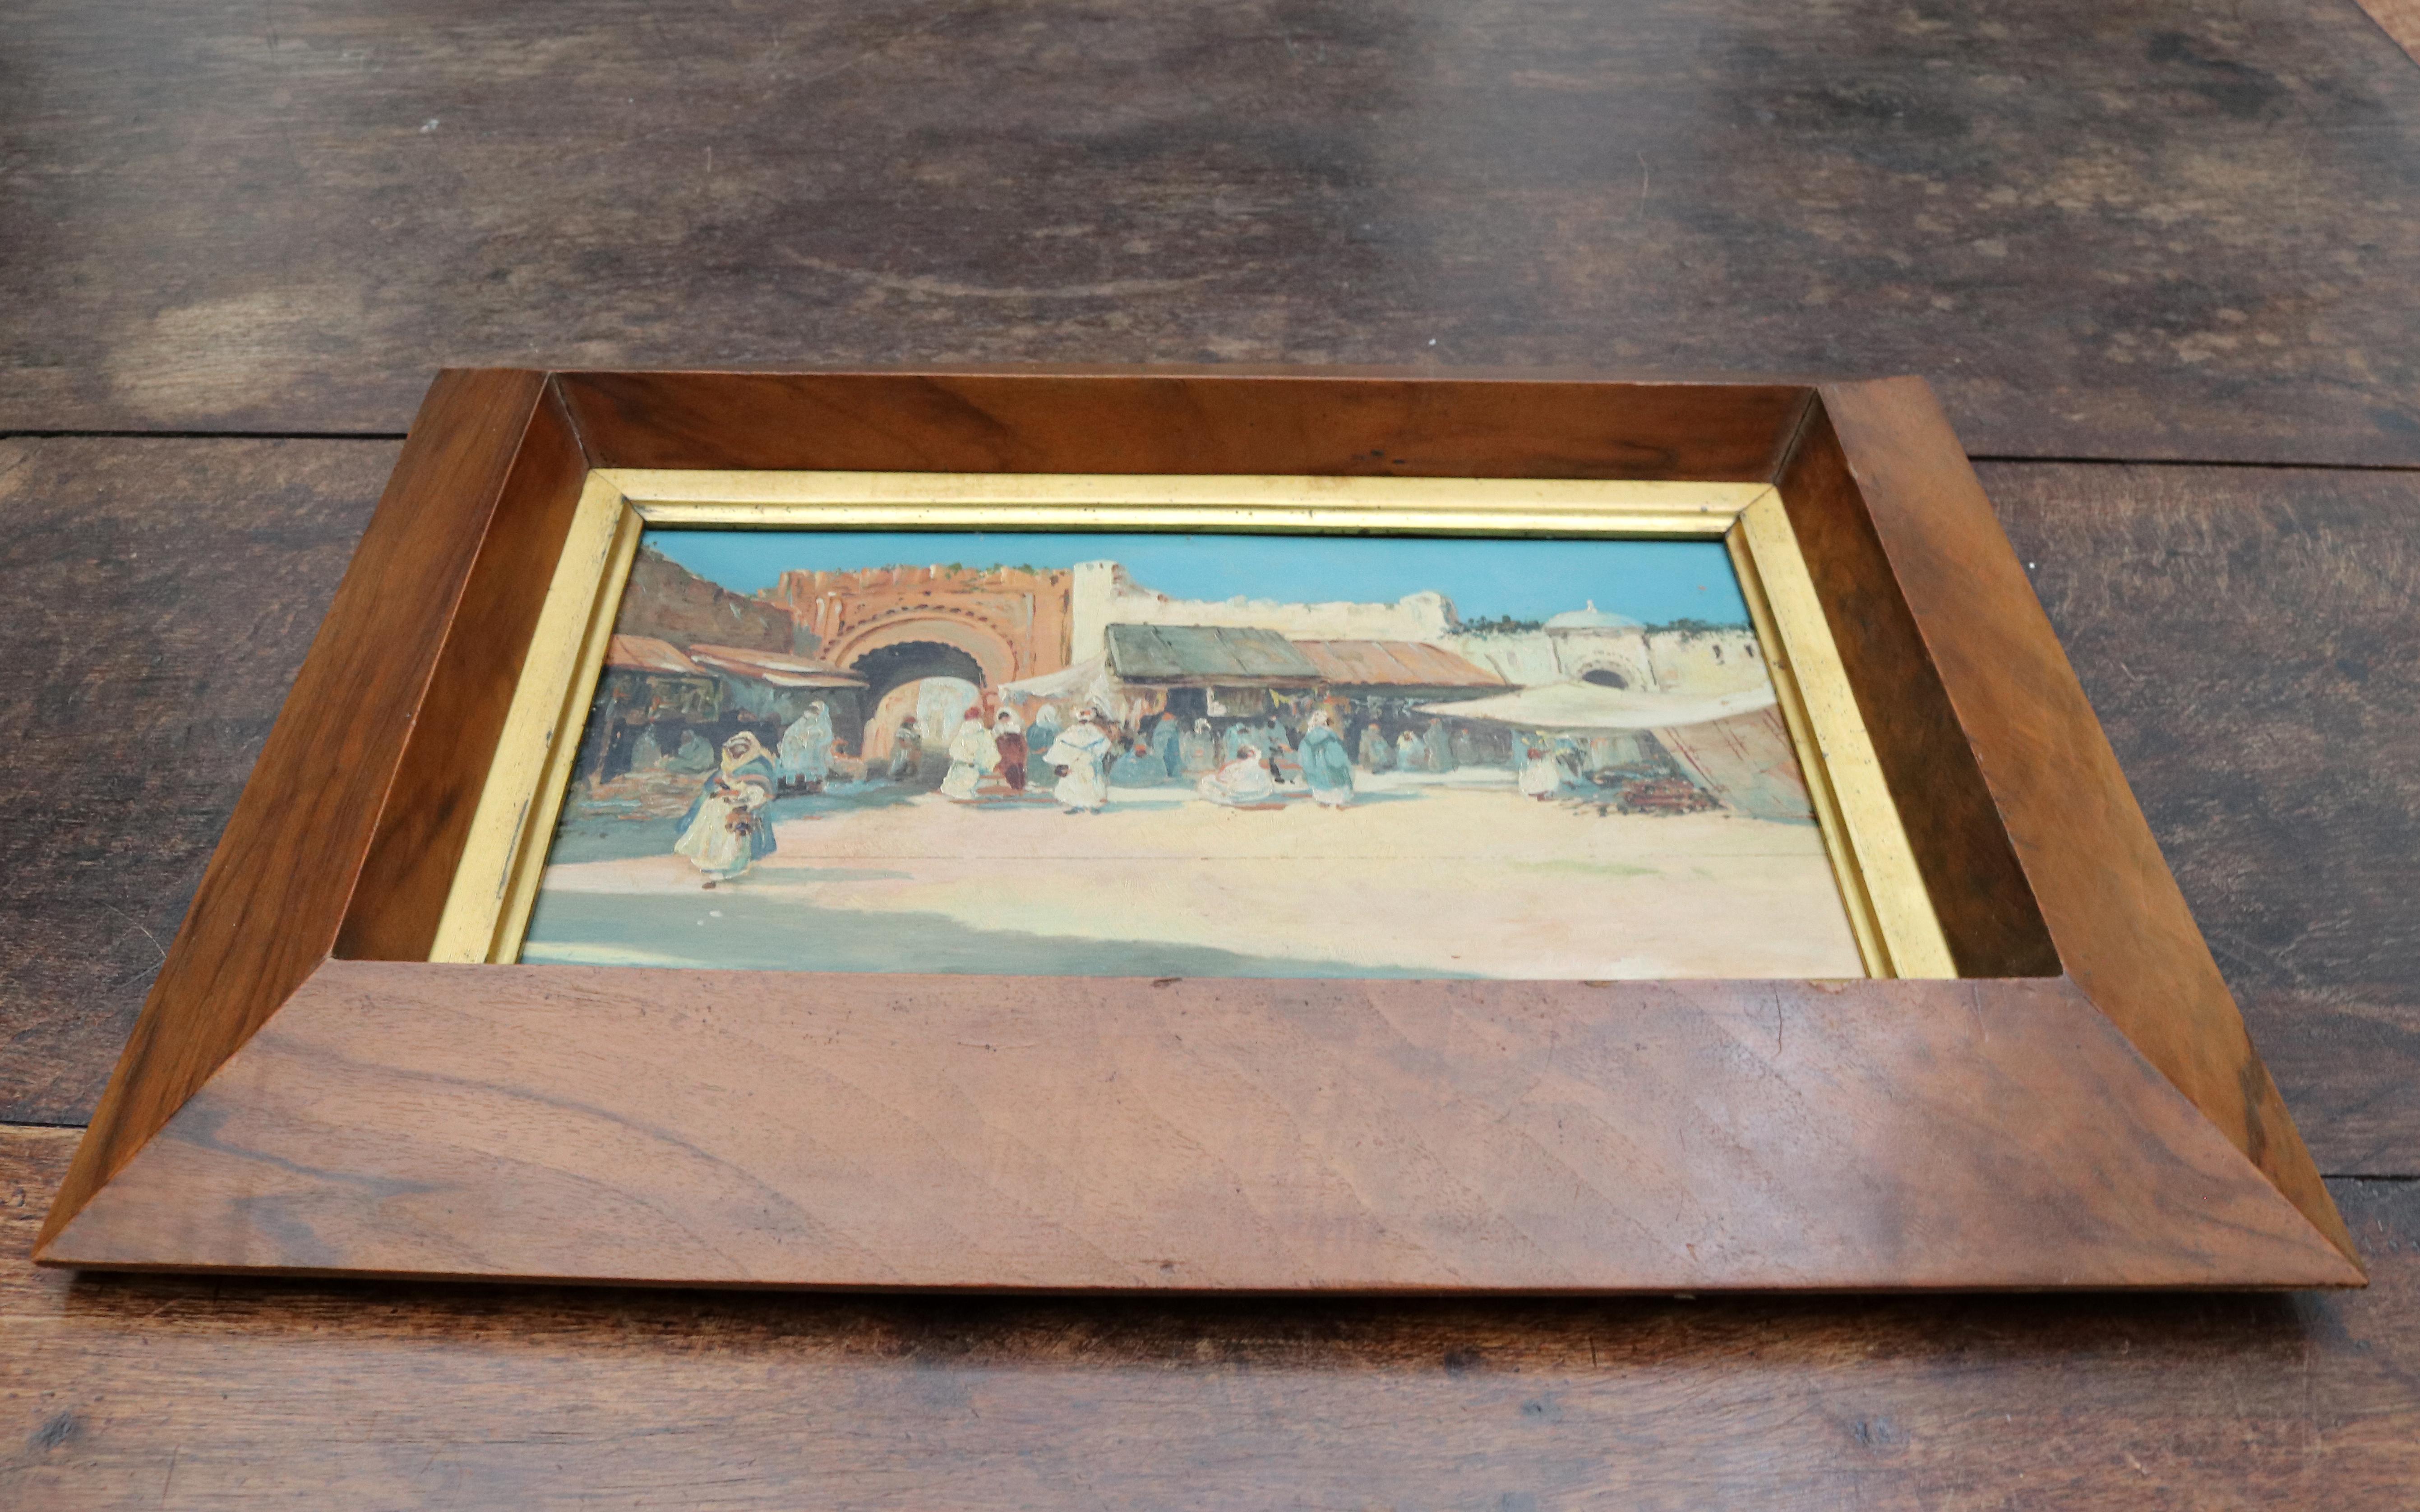 19th century French oil on wood orientalist painting with frame.

Dimensions with frame: 47 x 34 x 5.